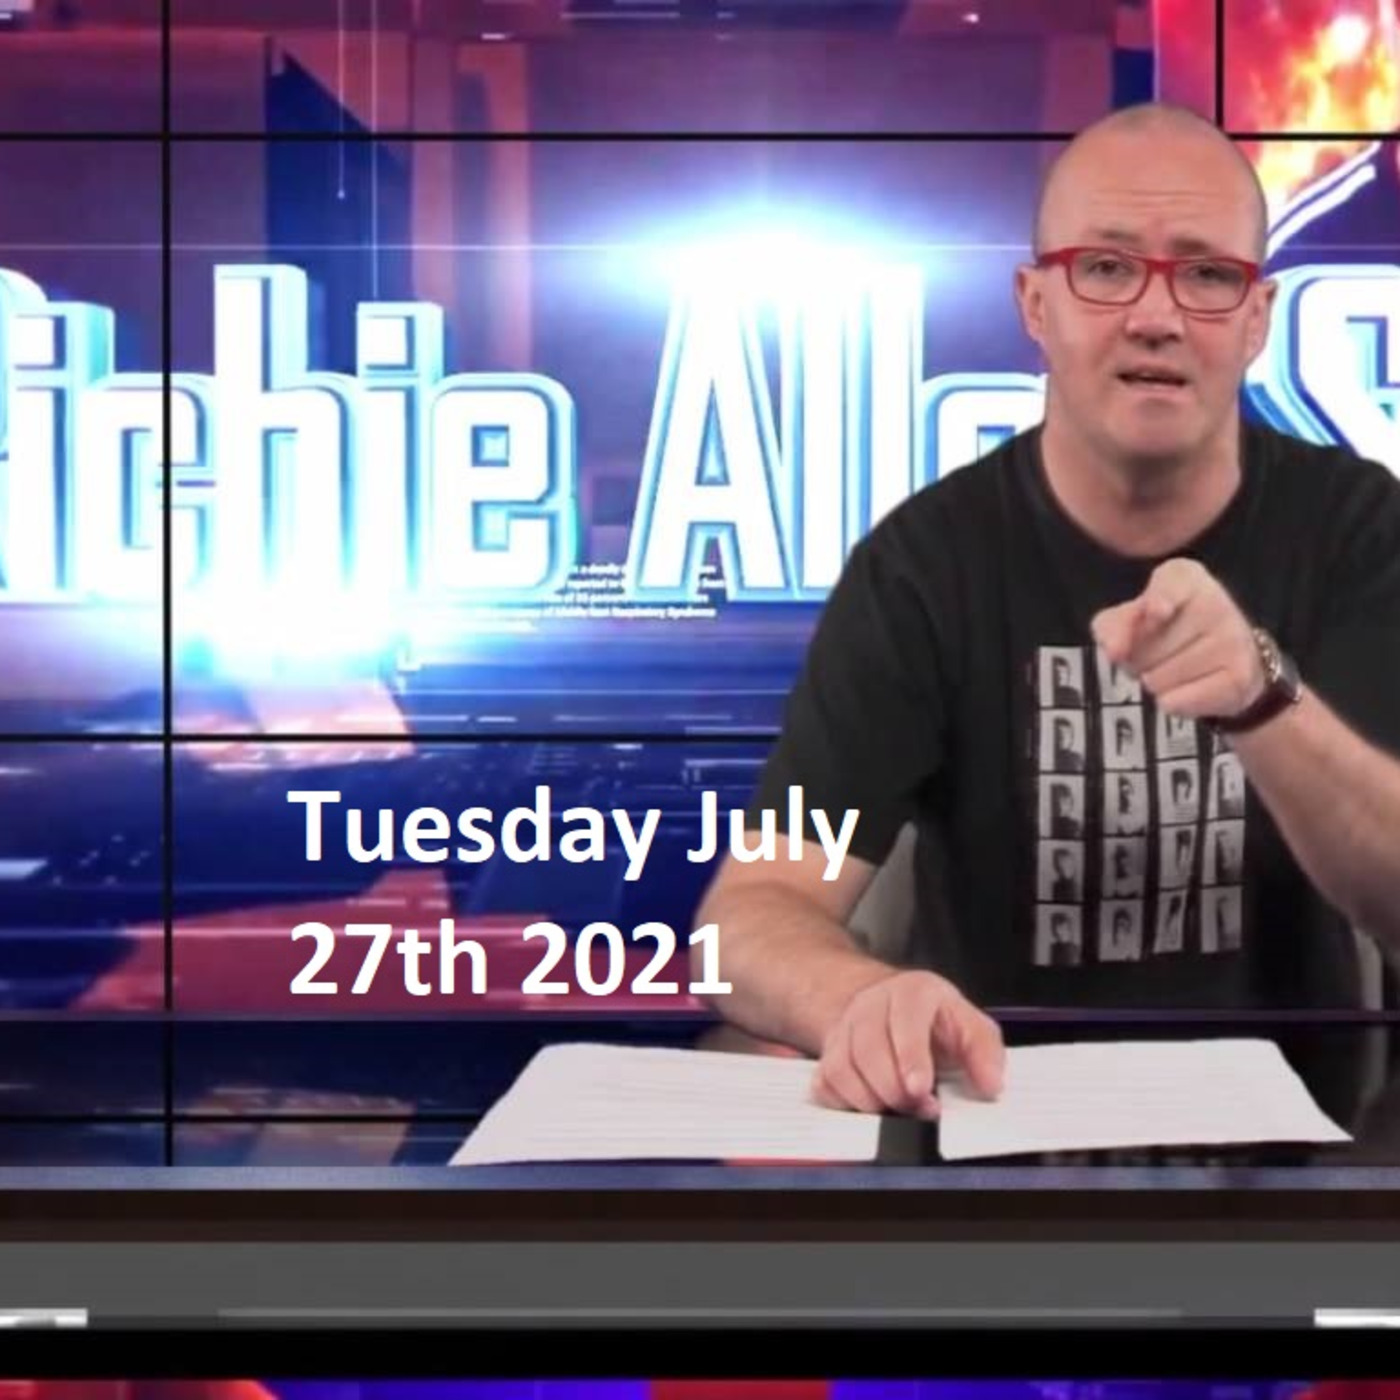 Episode 1317: The Richie Allen Show Tuesday July 27th 2021